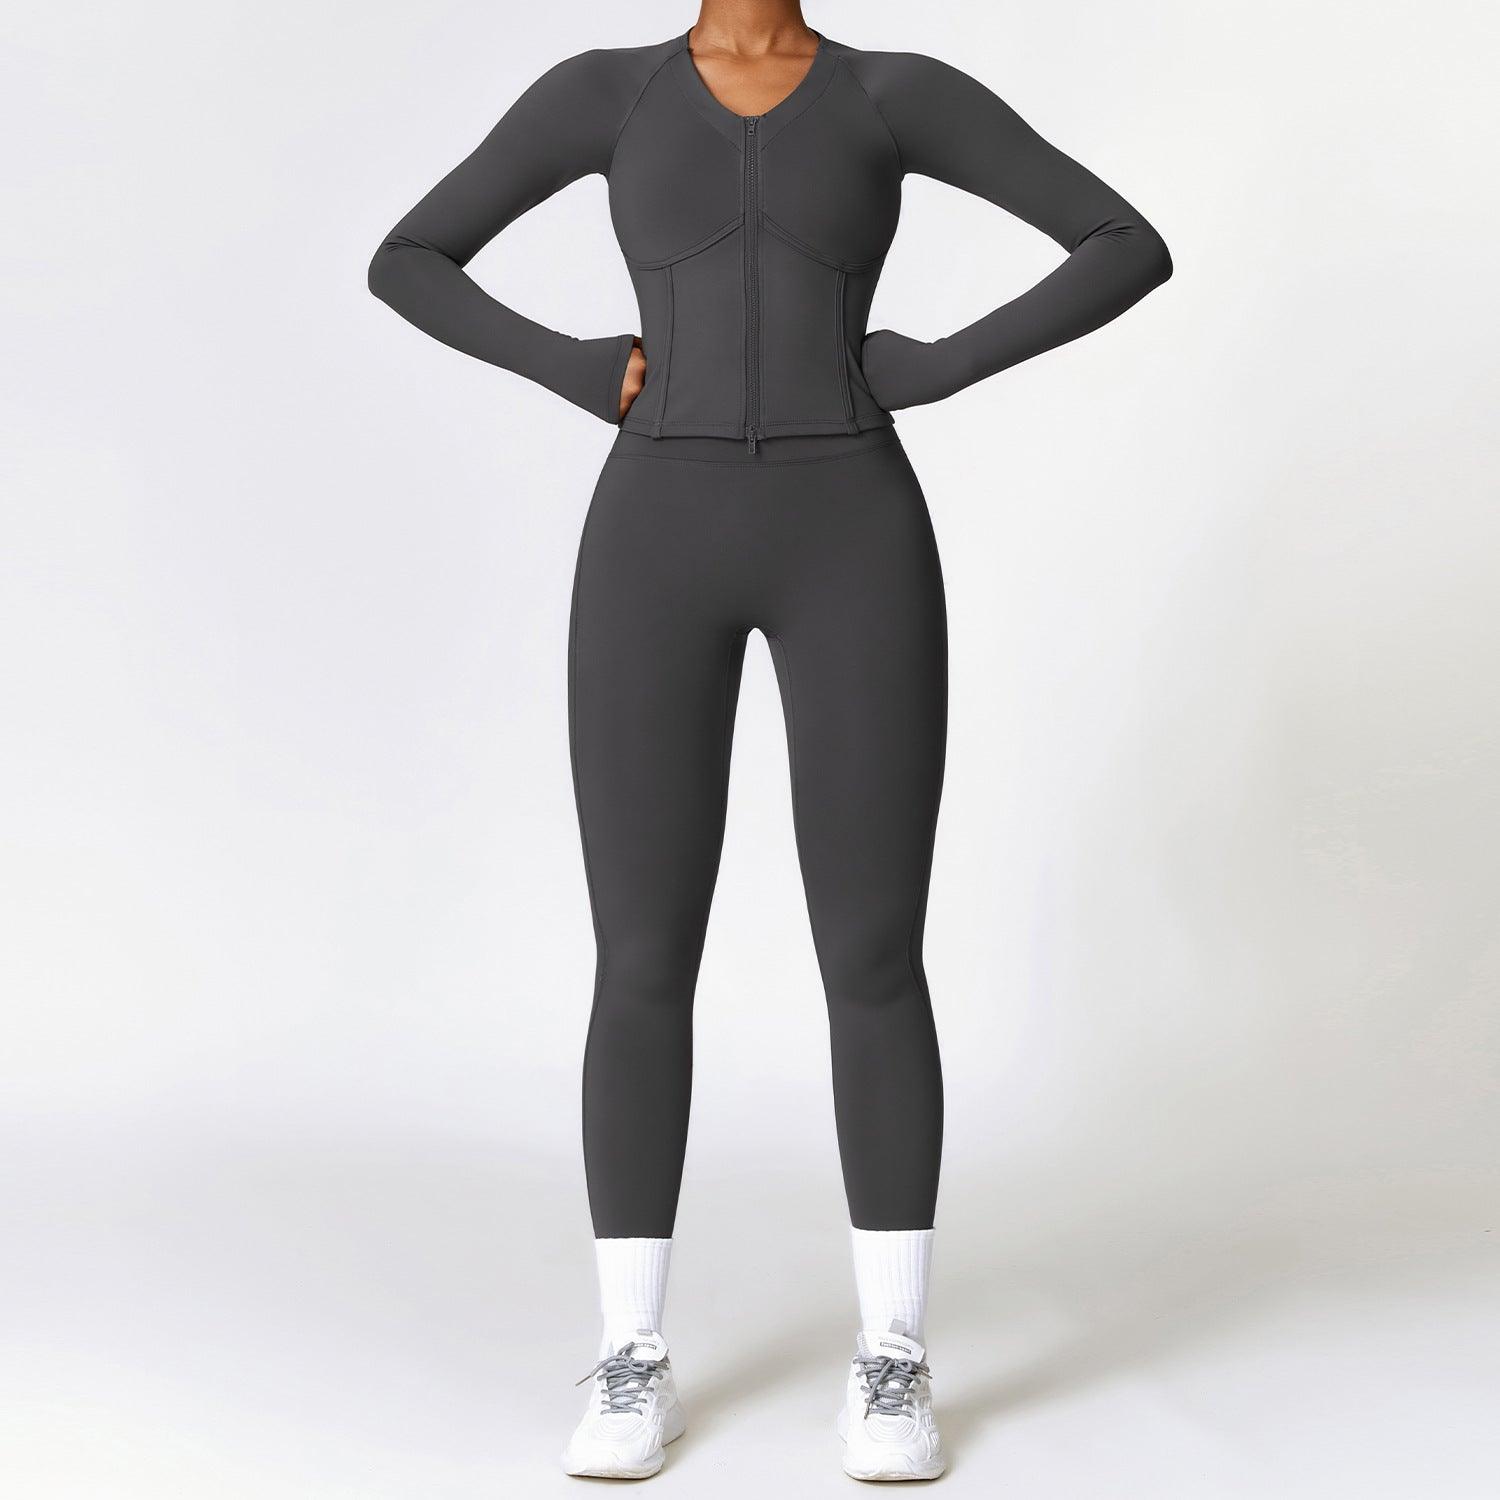 Women's Winter Fleece Thermal Long Sleeves Yoga Clothes Suit fitness & Sports